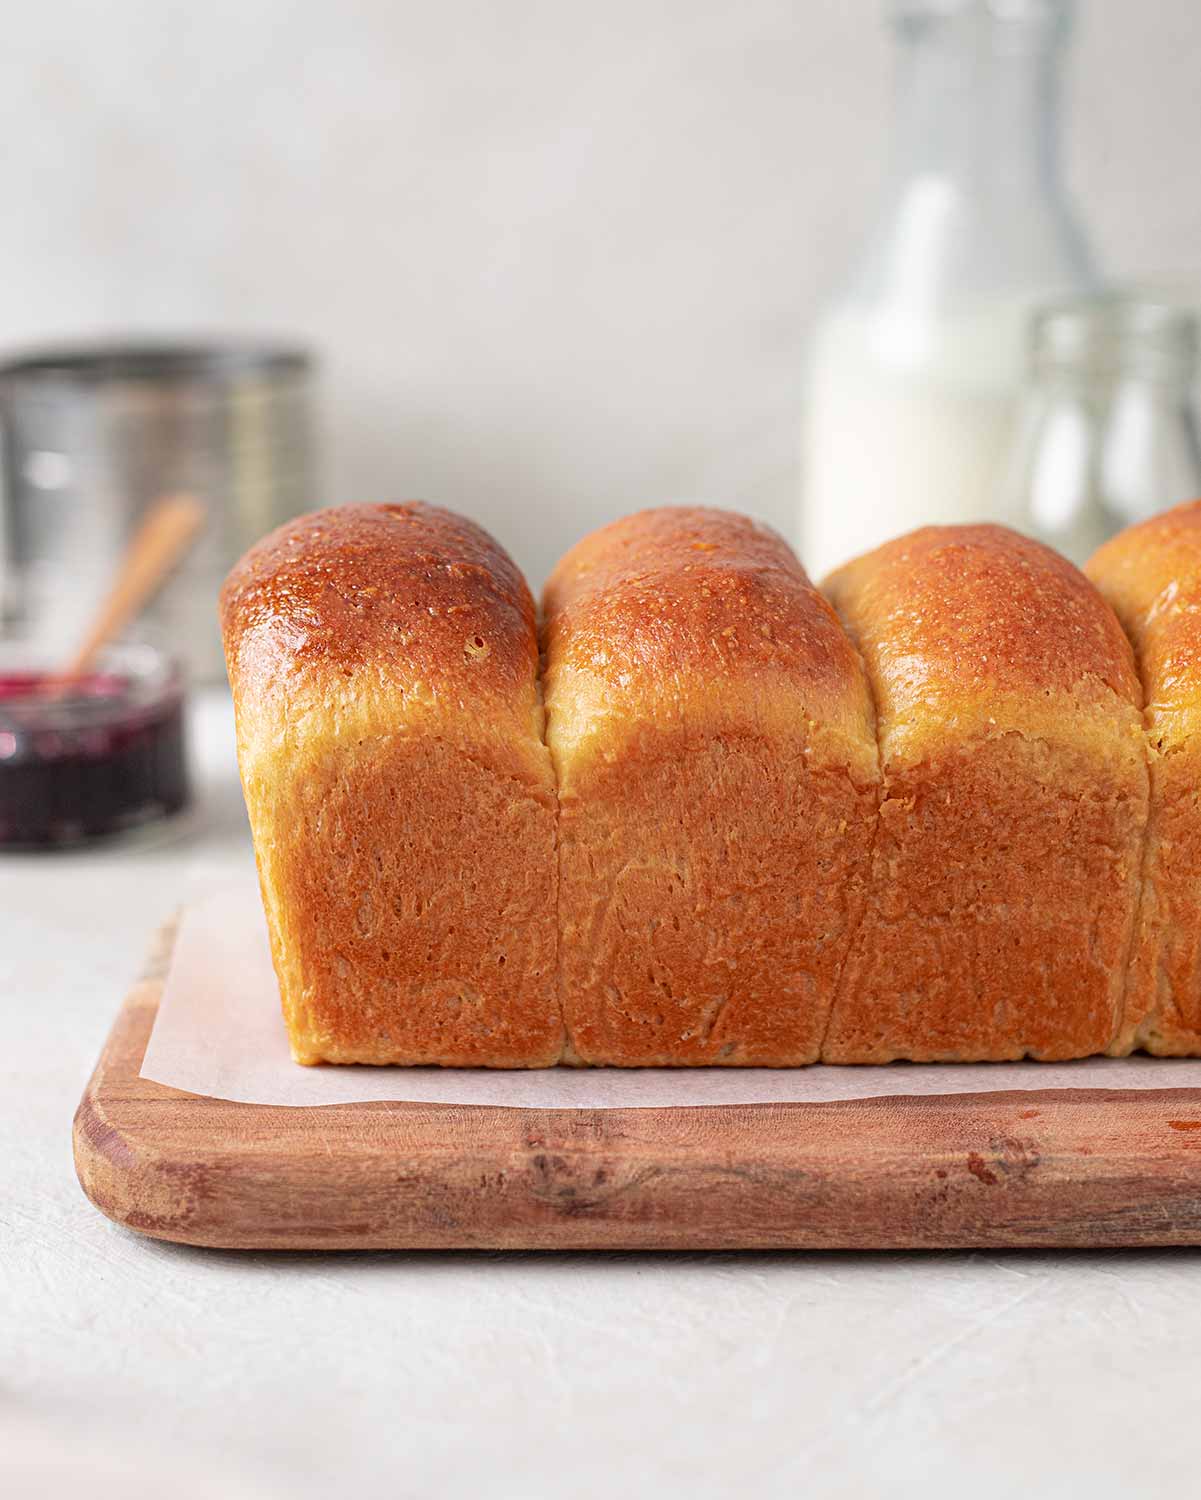 Side image of the golden brioche, showing the curved shape of the loaf.